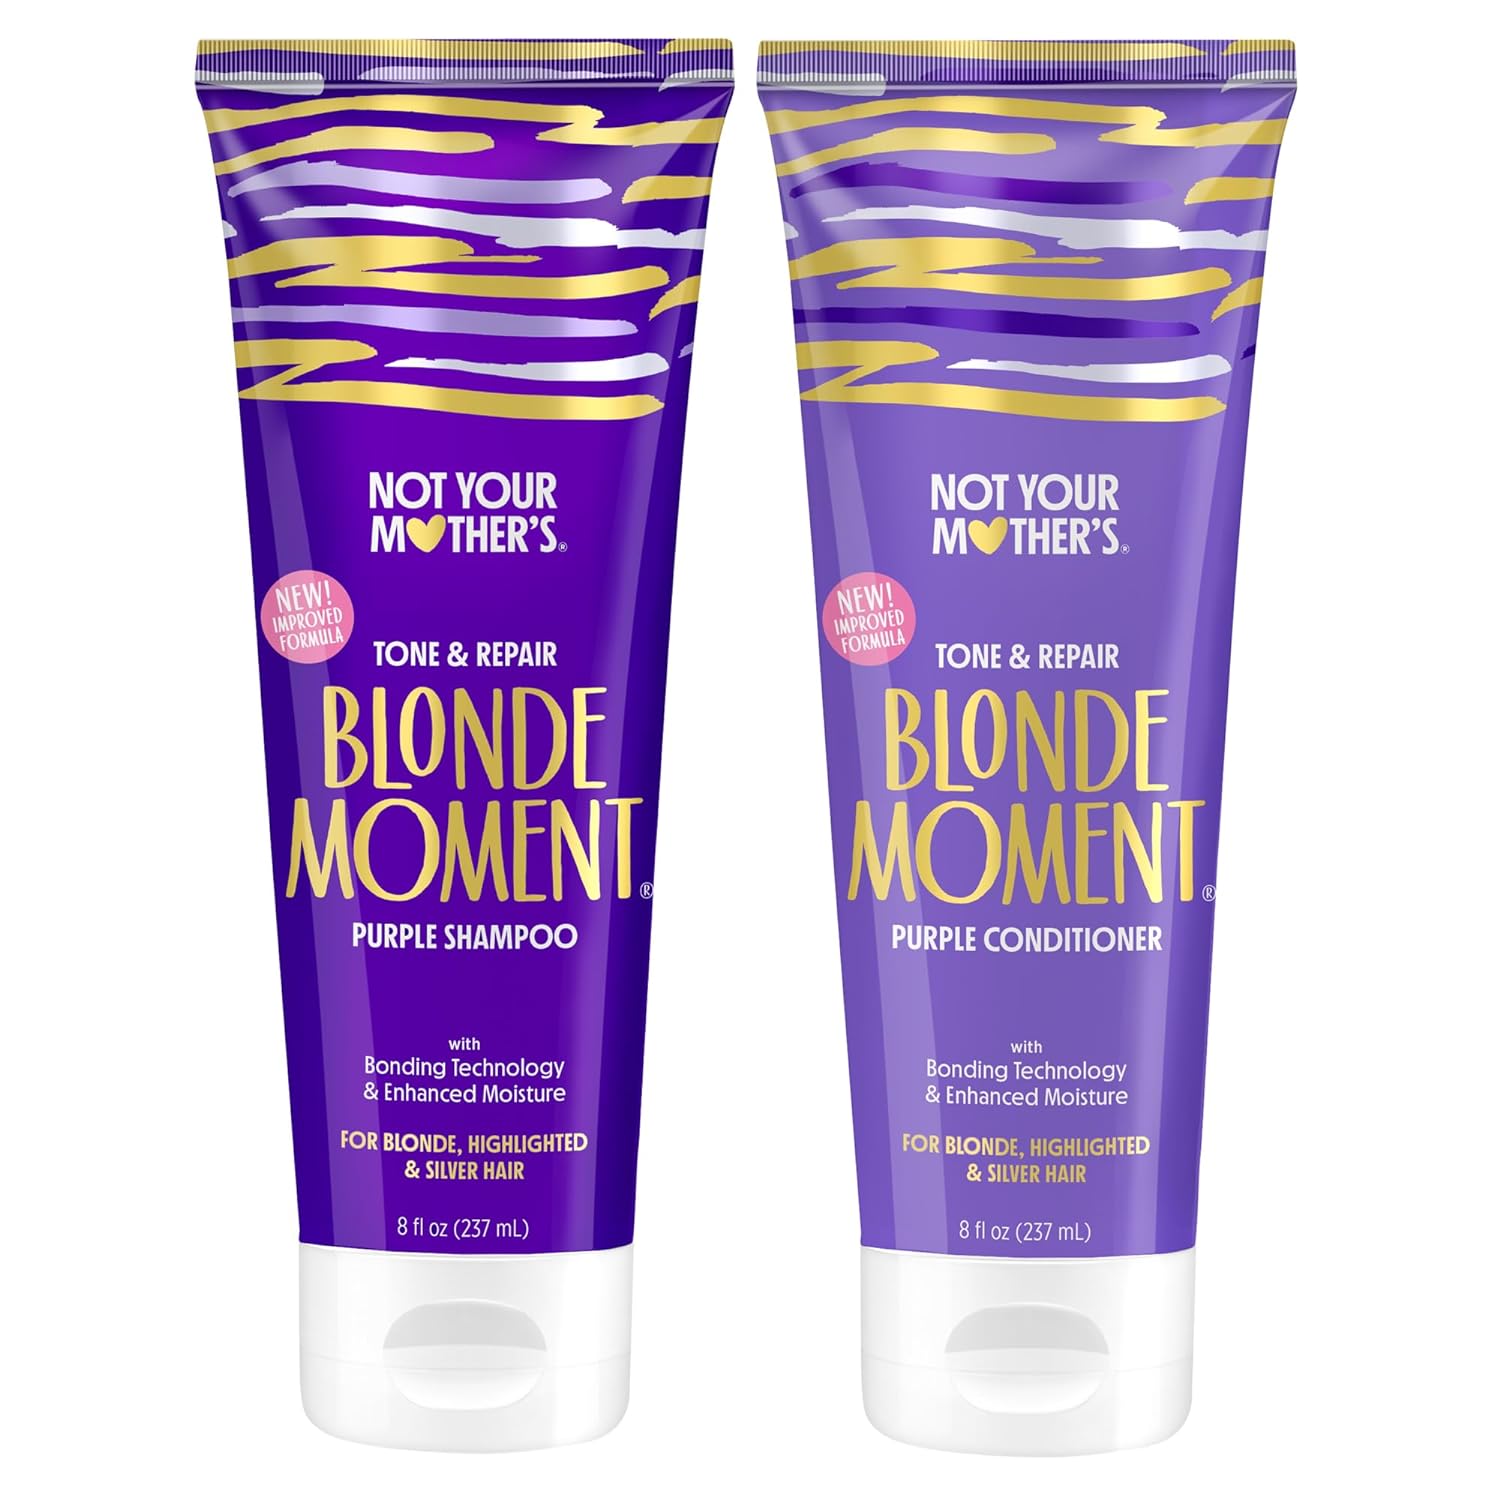 Not Your Mother's Blonde Moment Purple Shampoo and Conditioner Duo pack